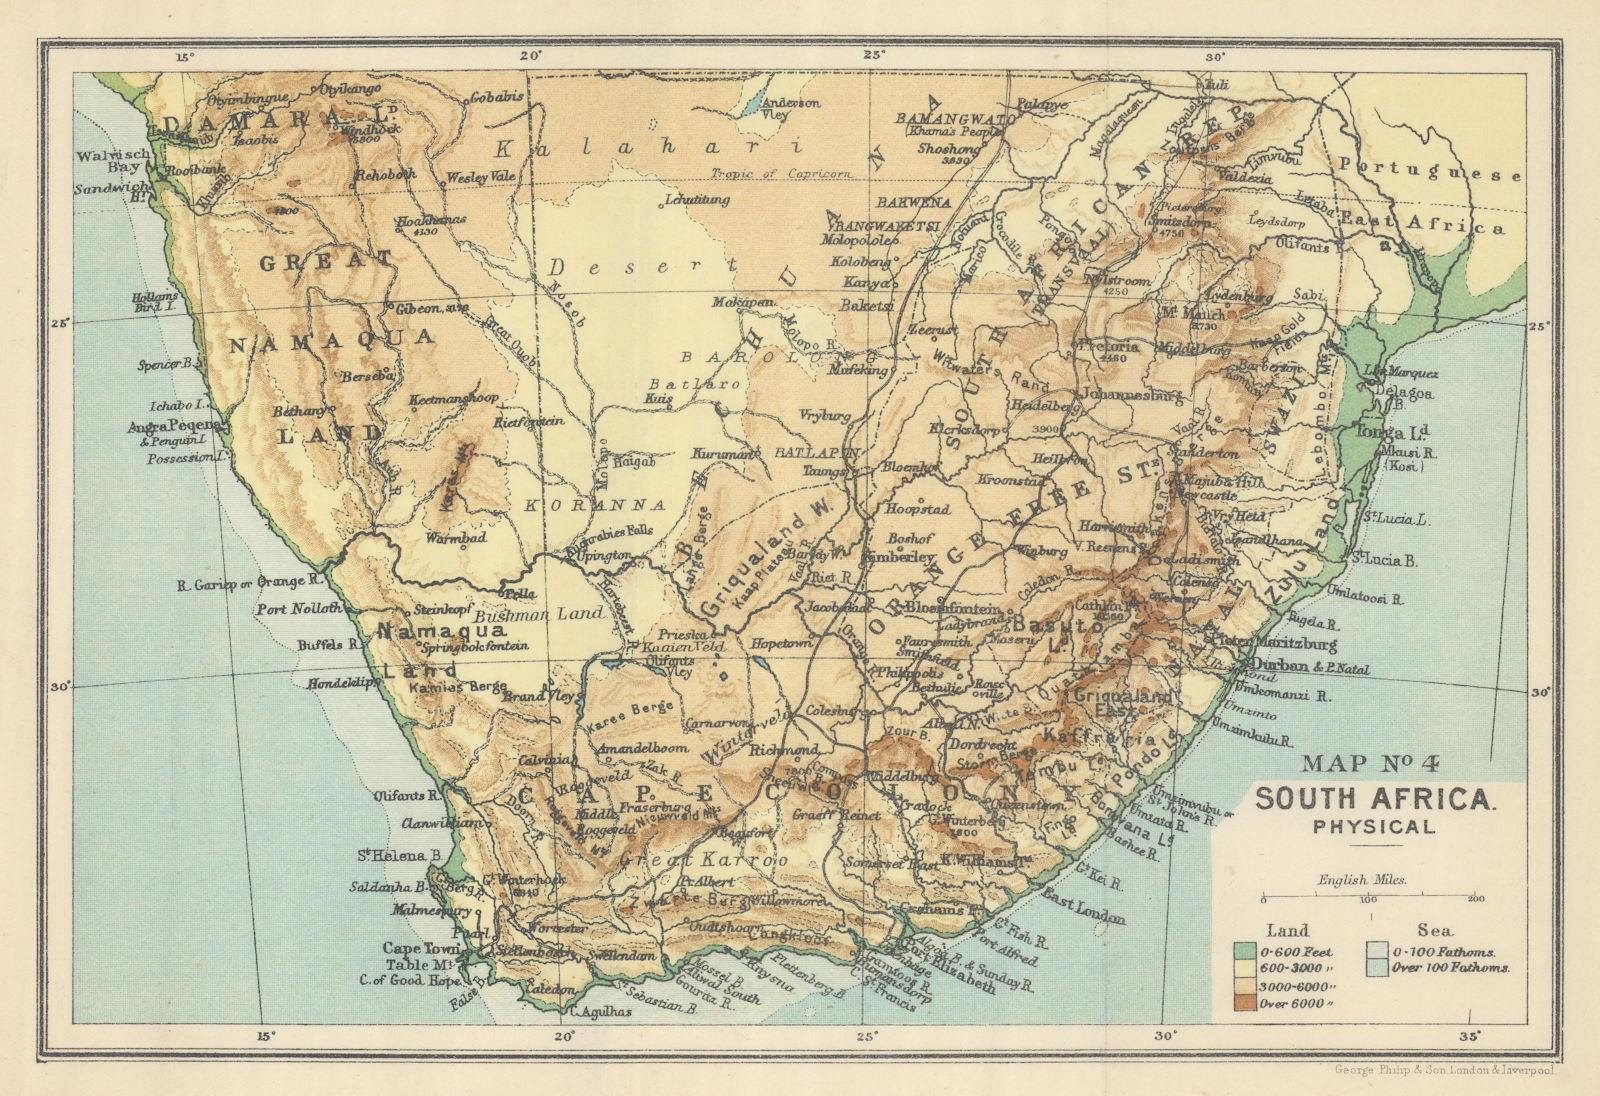 Associate Product South Africa - Physical. Elevation. SAMLER BROWN 1899 old antique map chart